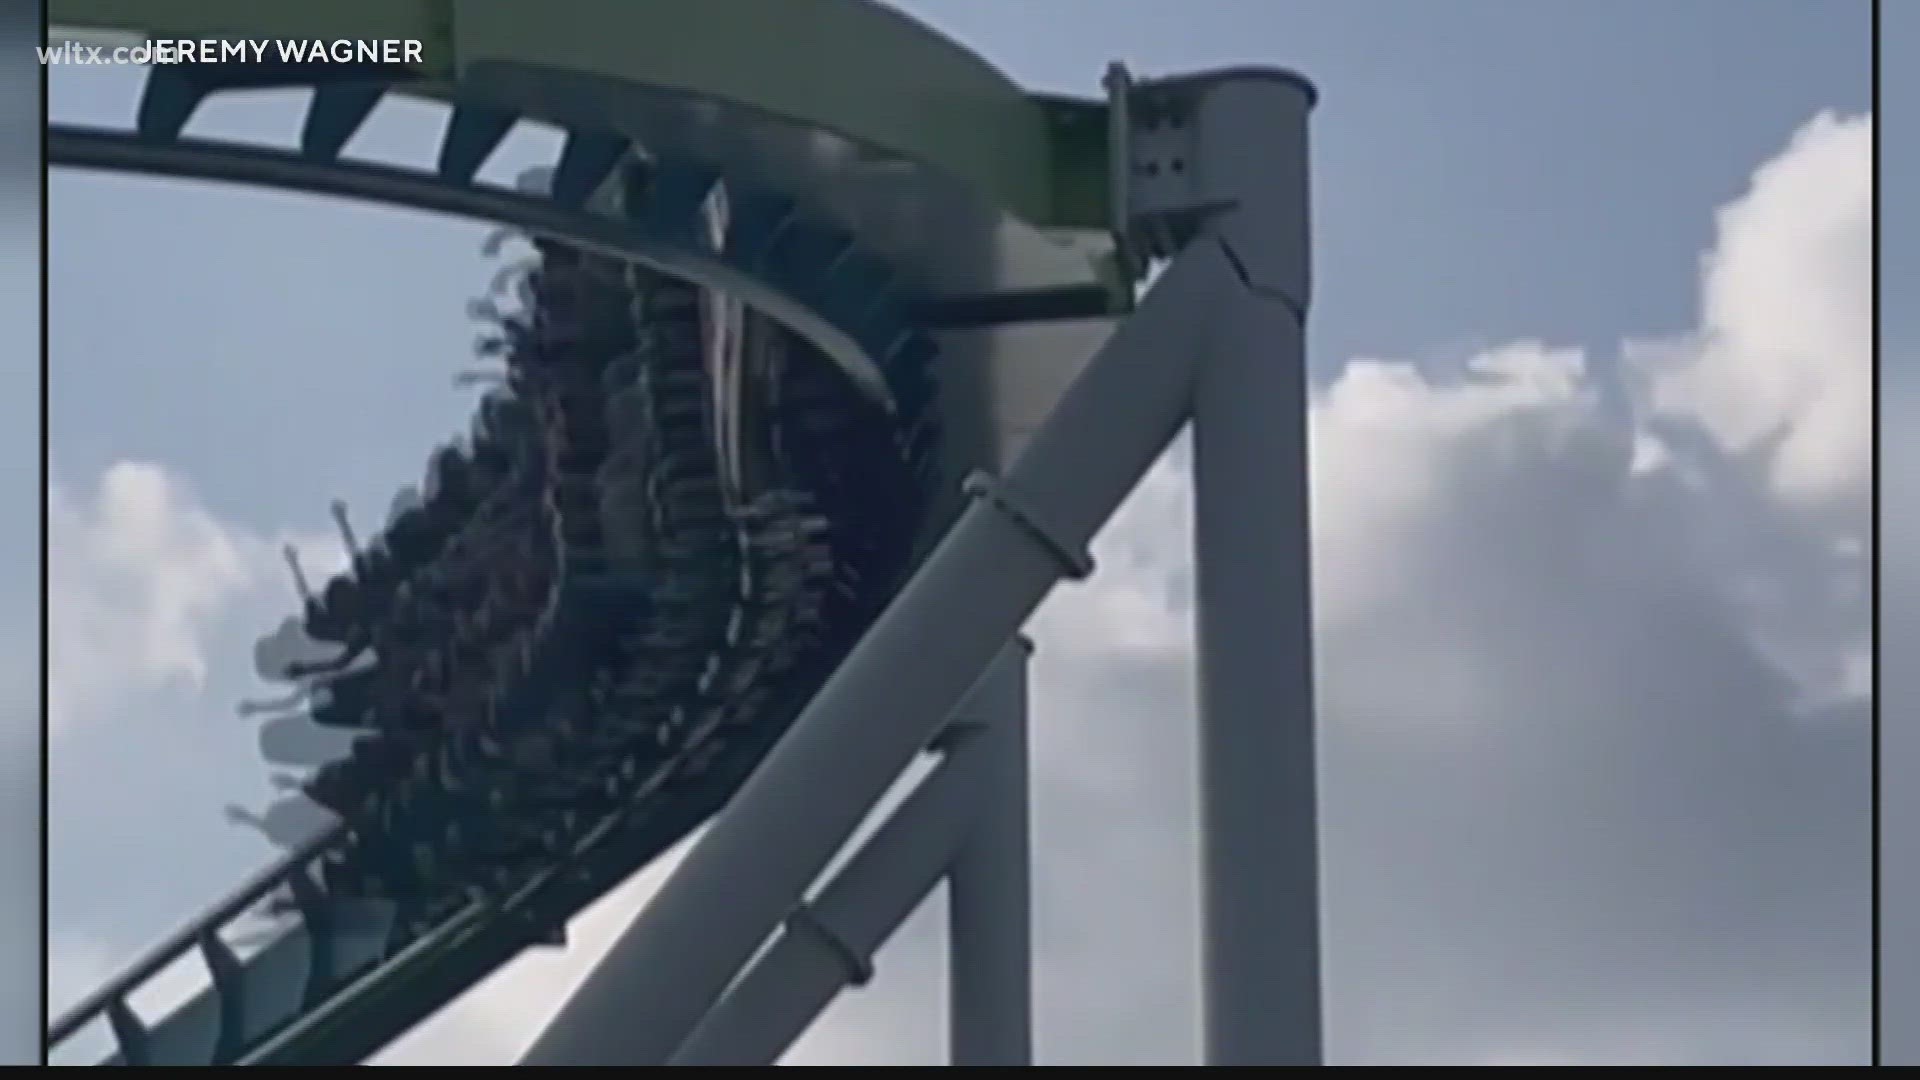 Fury 325 has been closed ever since a huge crack was found in one of the coaster's support beams.